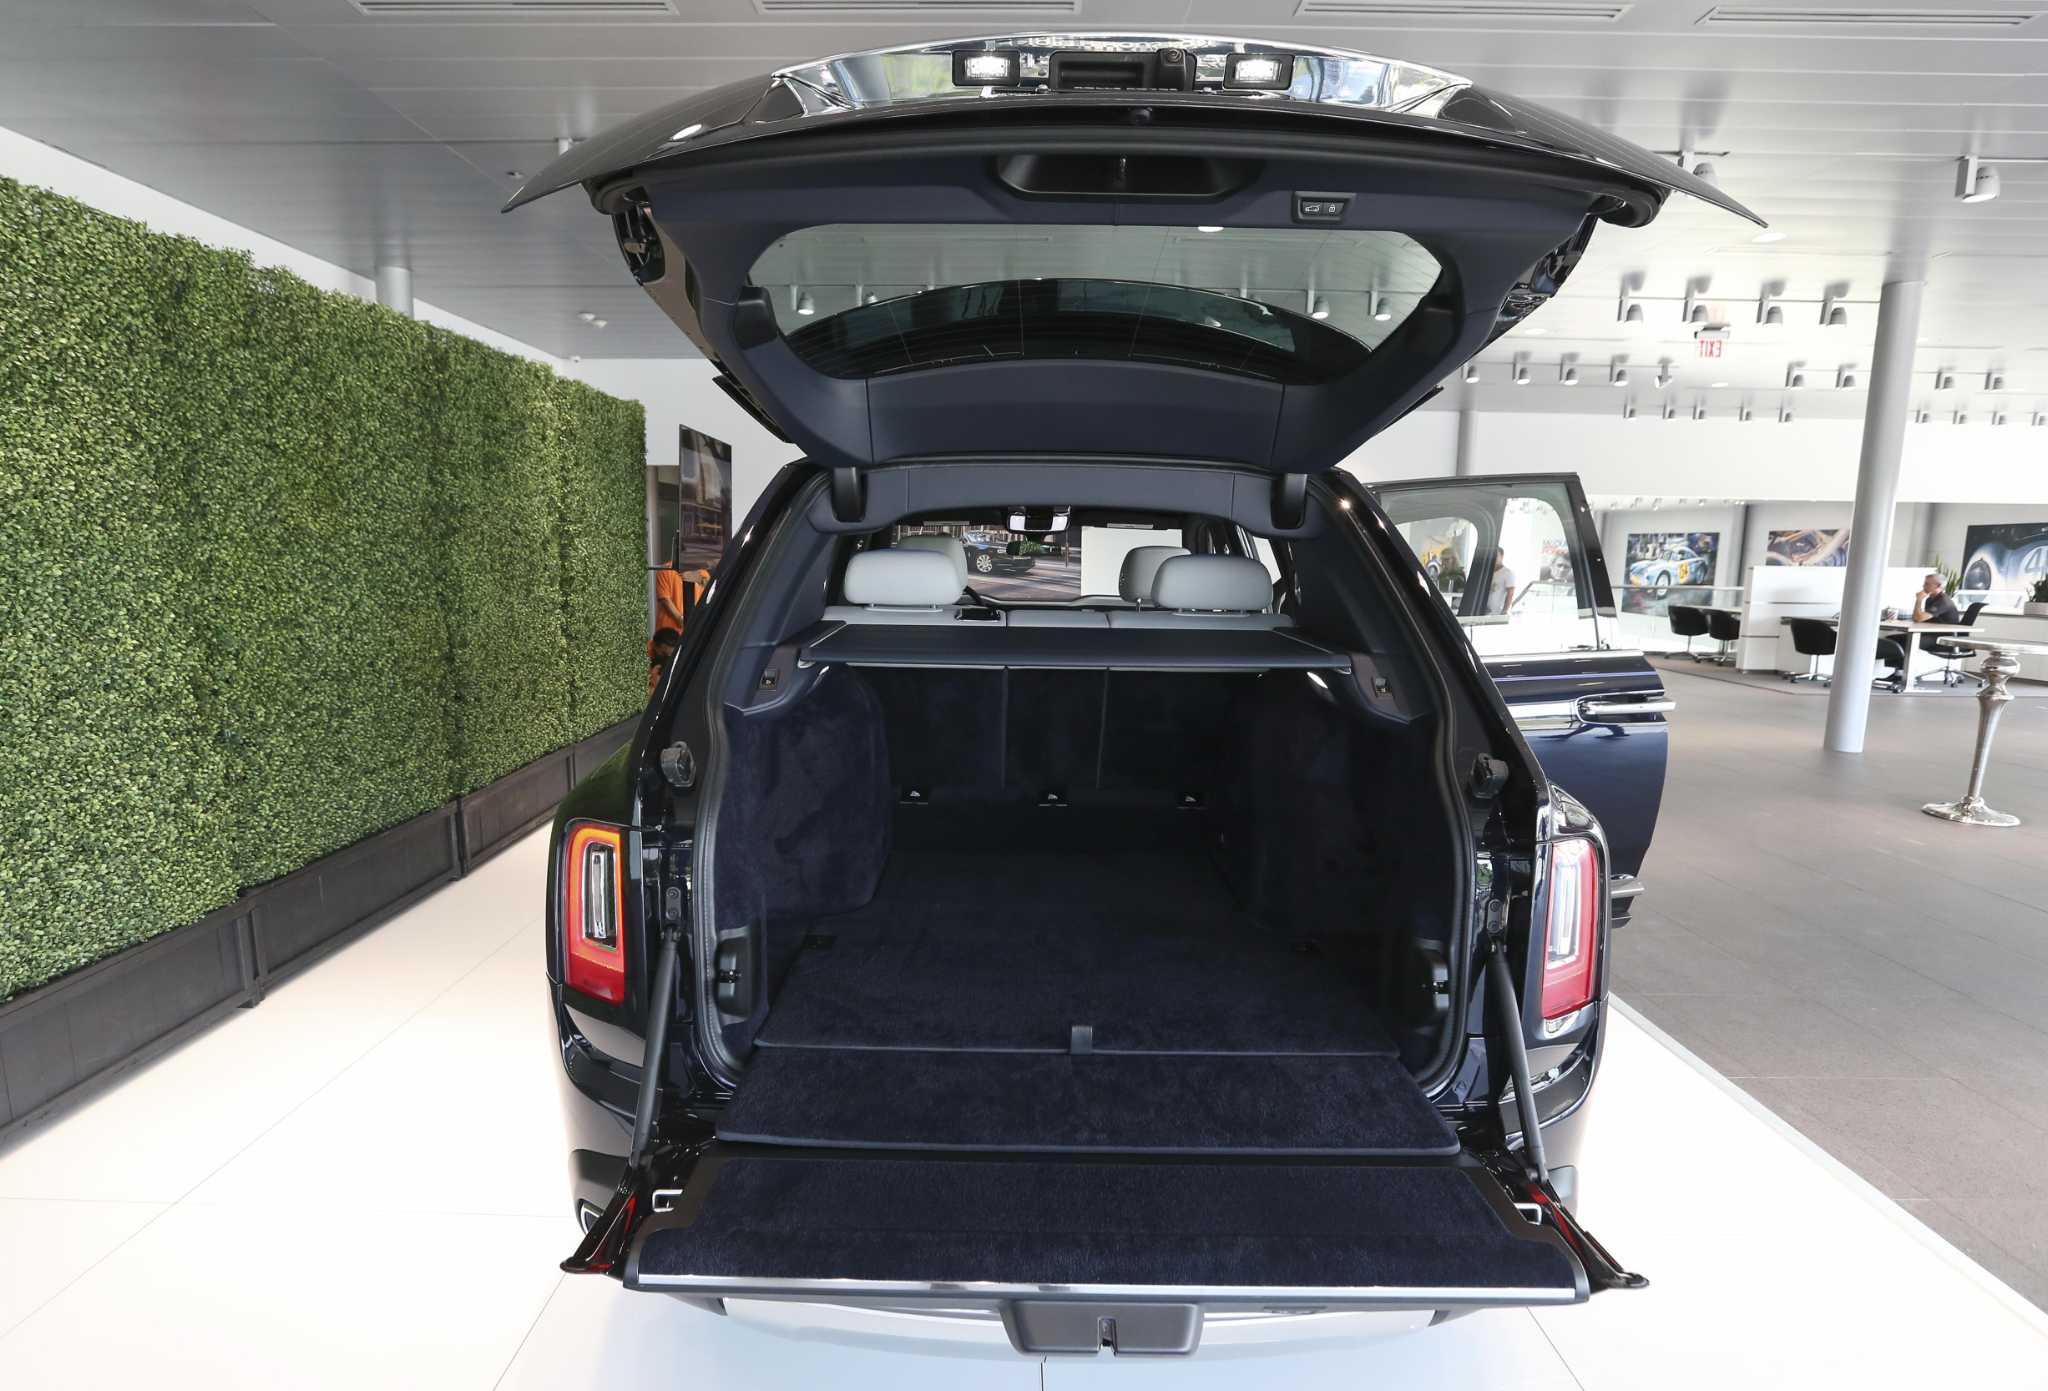 Rolls-Royce Debuts Cullinan SUV With $325K Starting Price, 563 HP